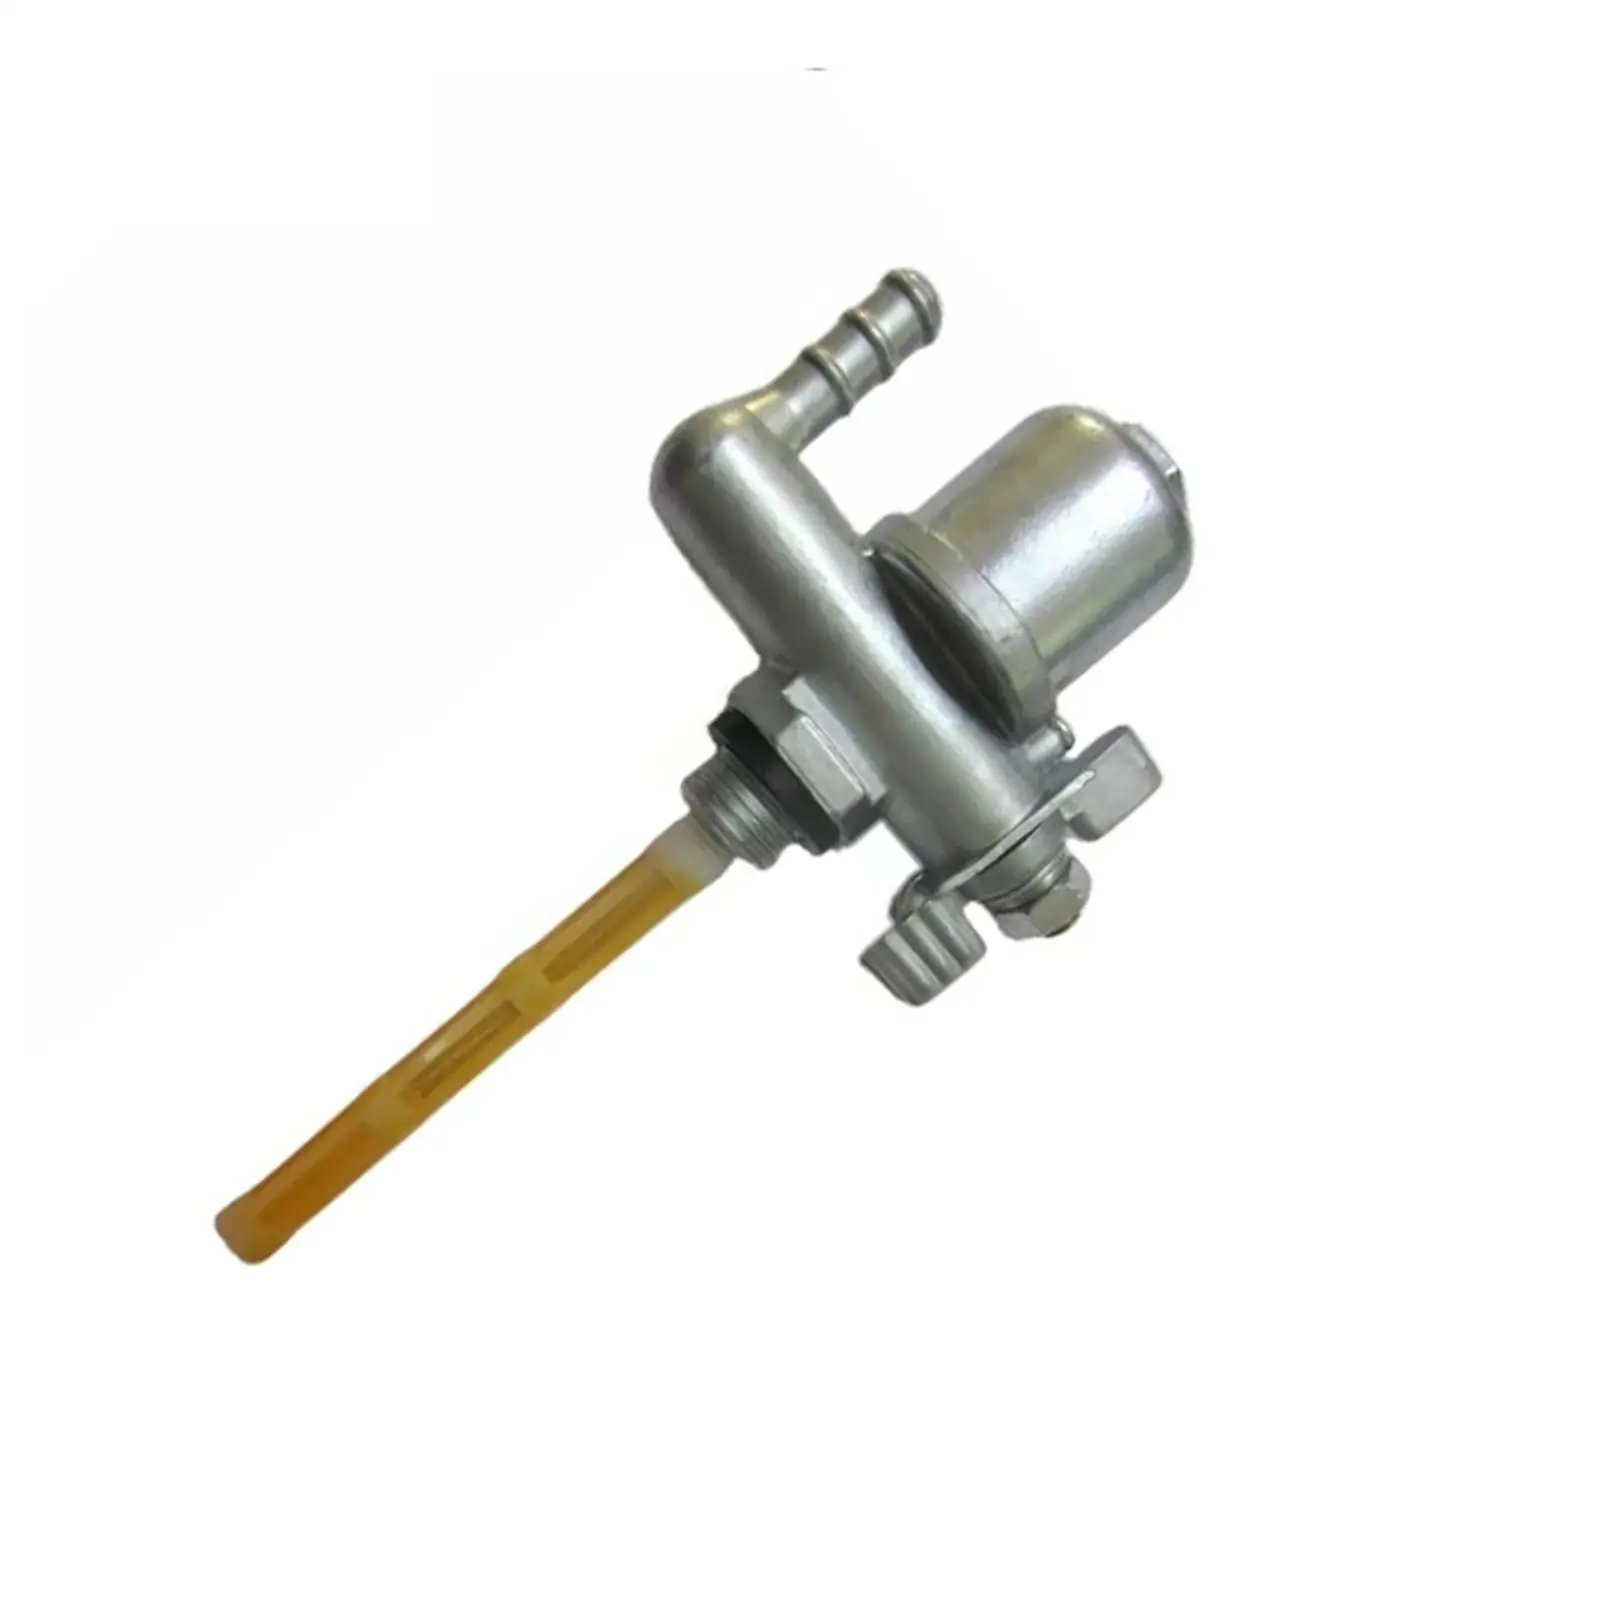 Motorcycle fuel Switch Pump Valve Petcock Replacement Fits for Ruassia Msk Motorbikes Supplies Durable Motorbike Accessories